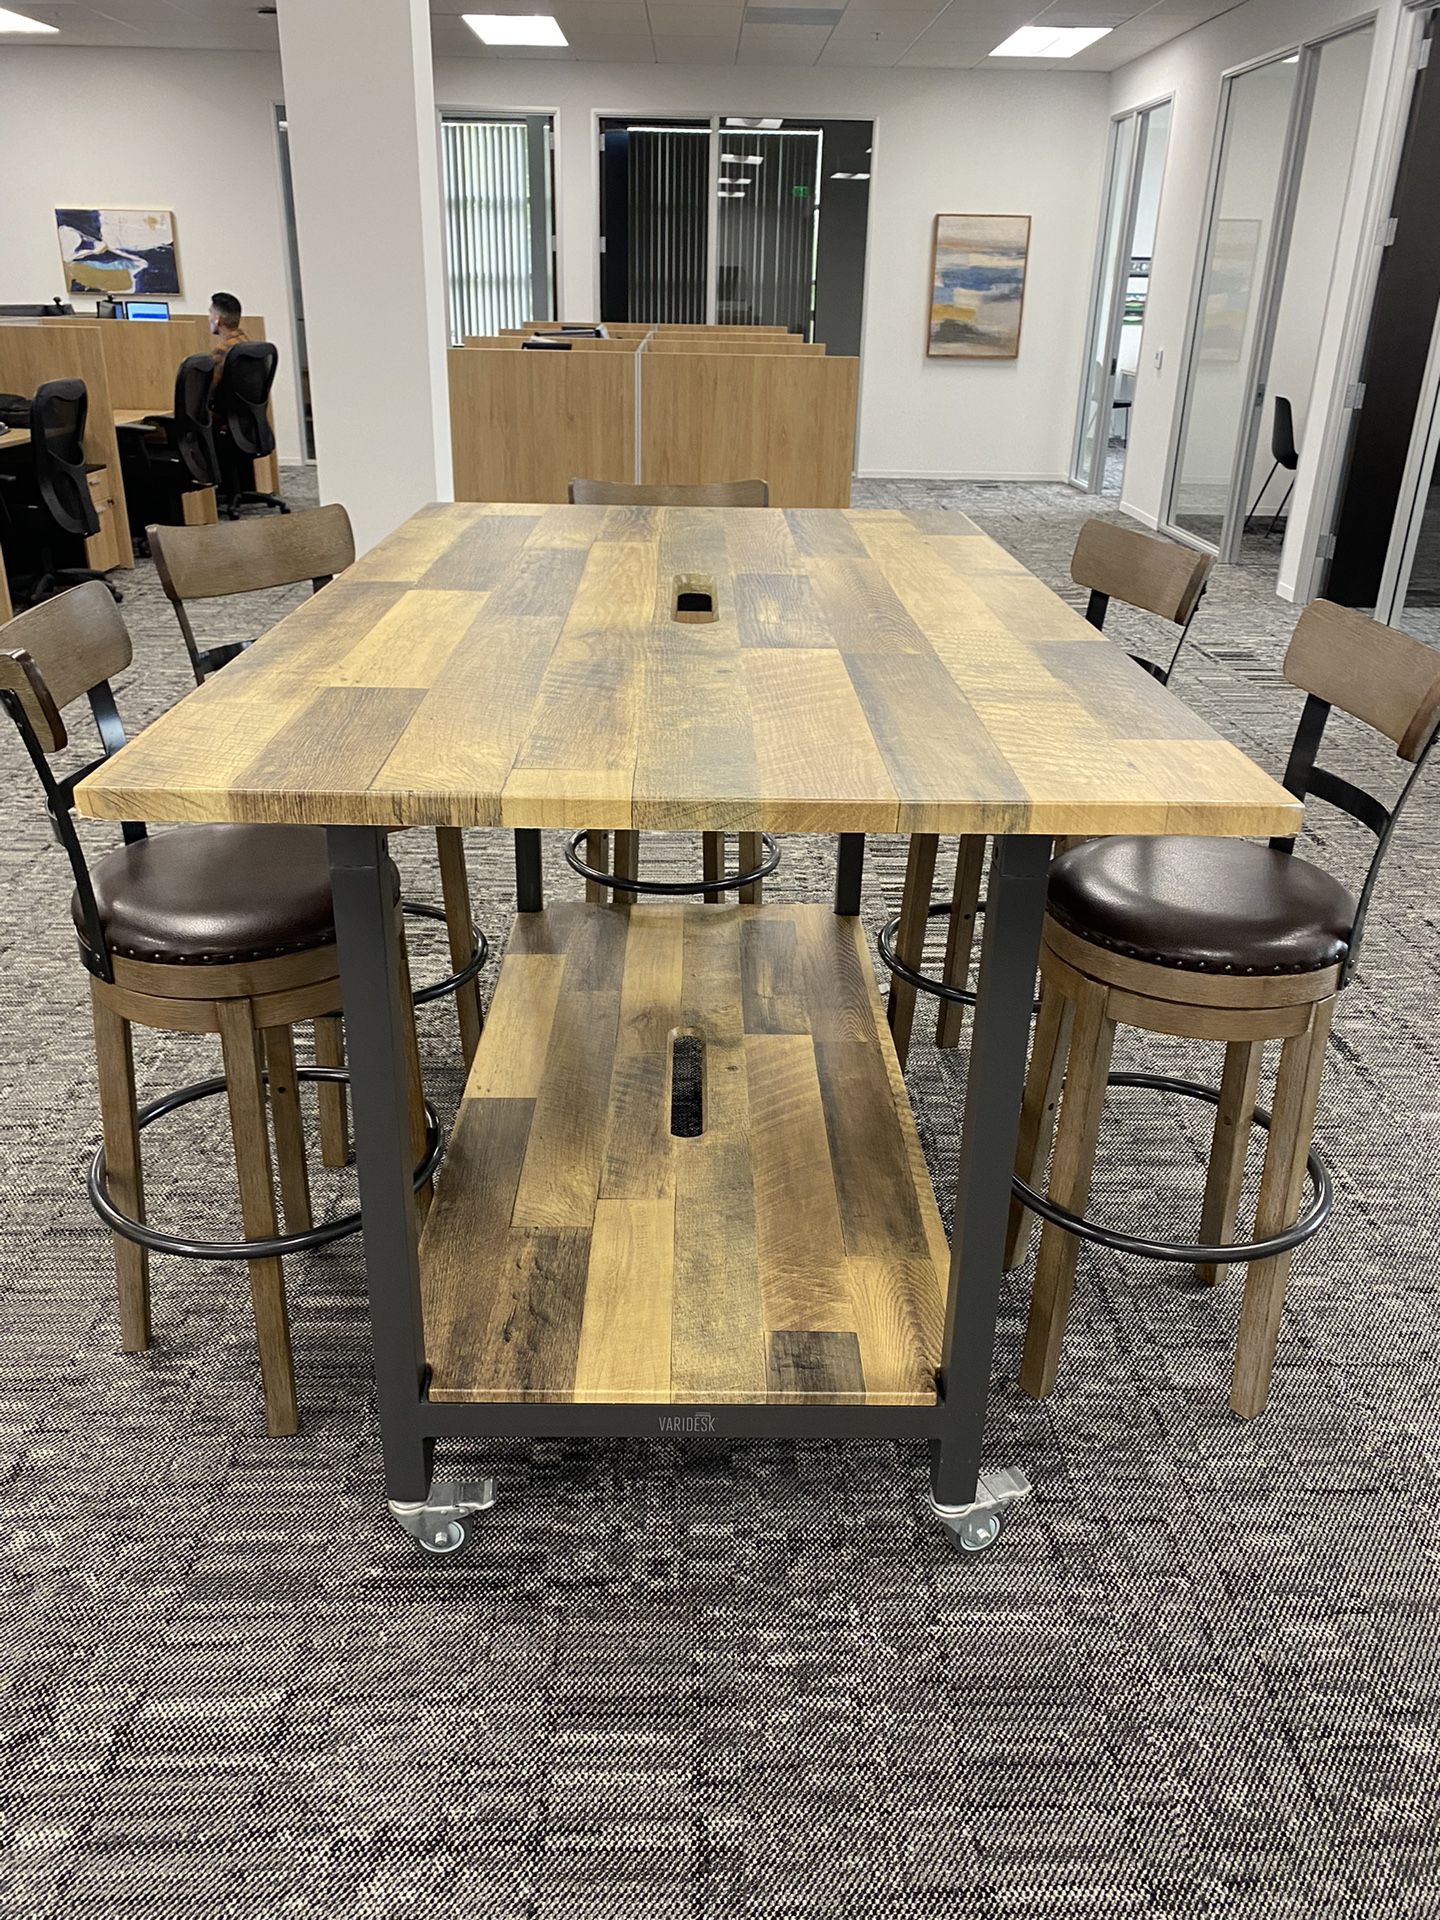 Vari Standing Conference table